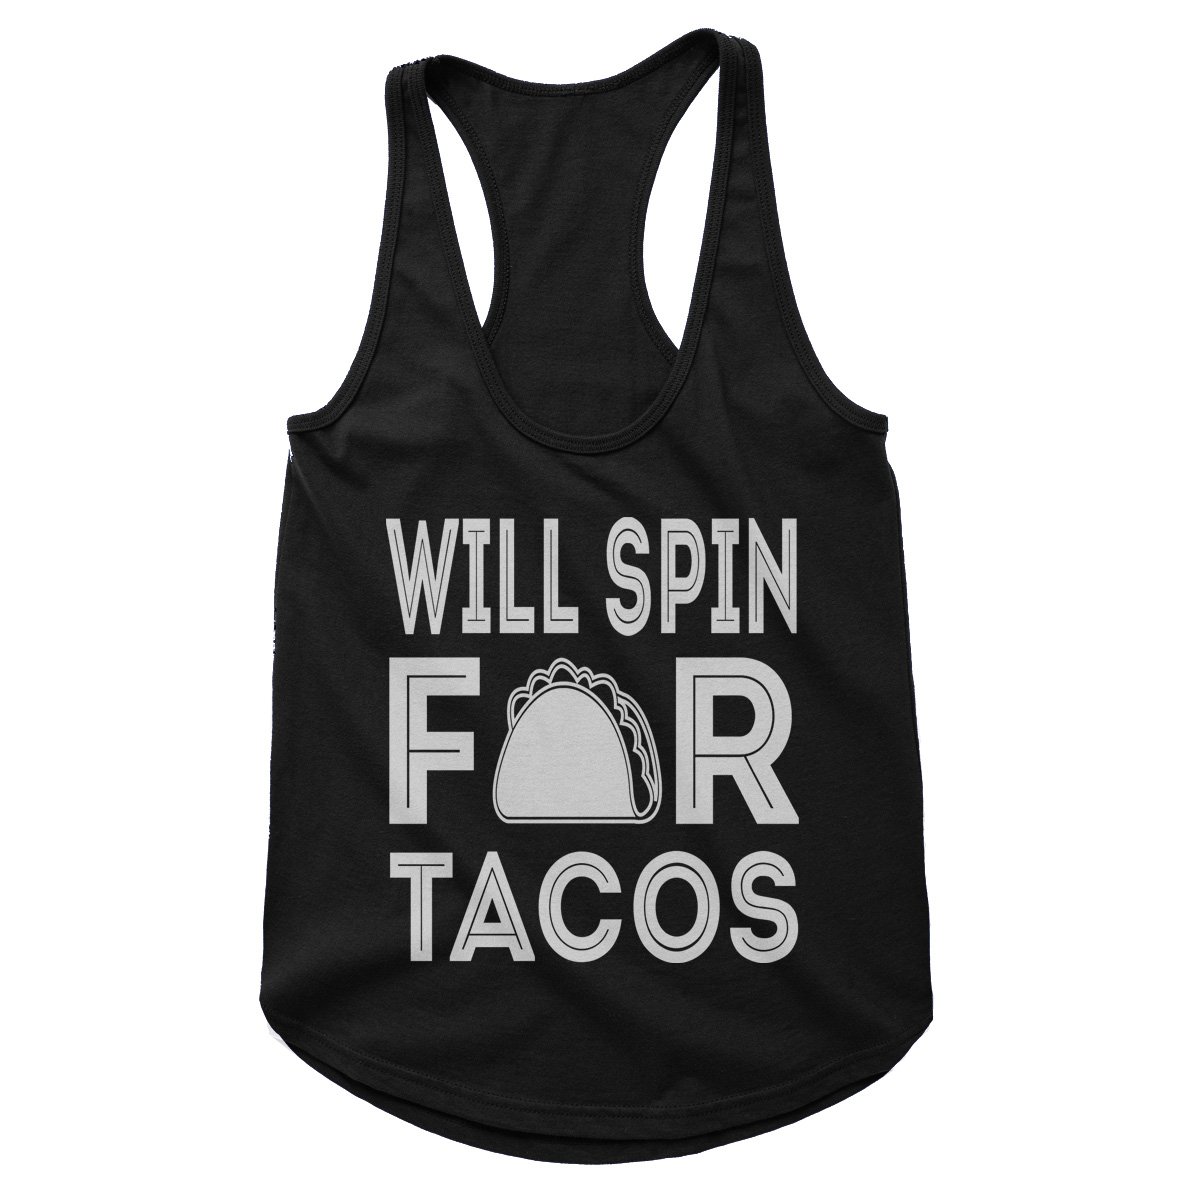 Will Spin For Tacos Workout Tank (Woman)